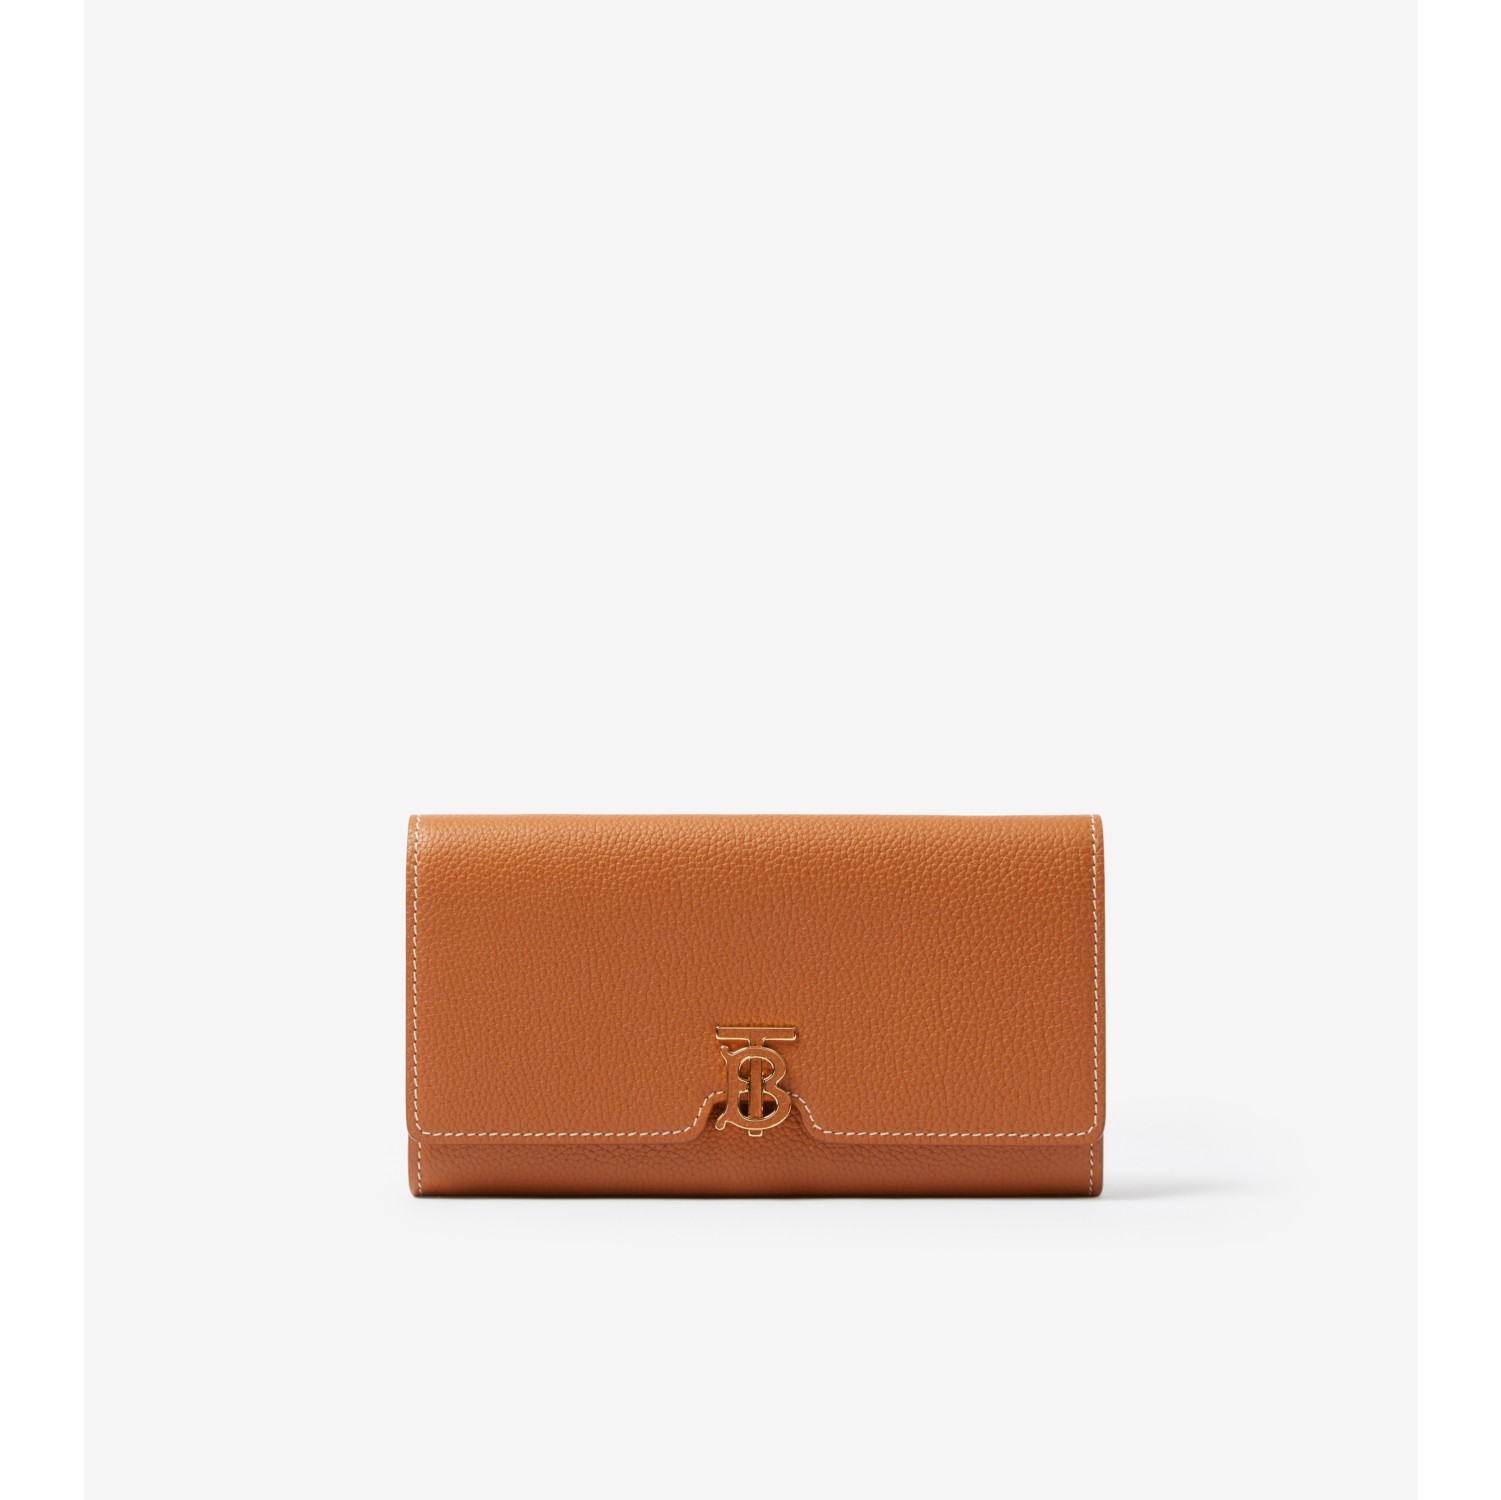 Grainy Leather TB Continental Wallet in Black - Women | Burberry® Official